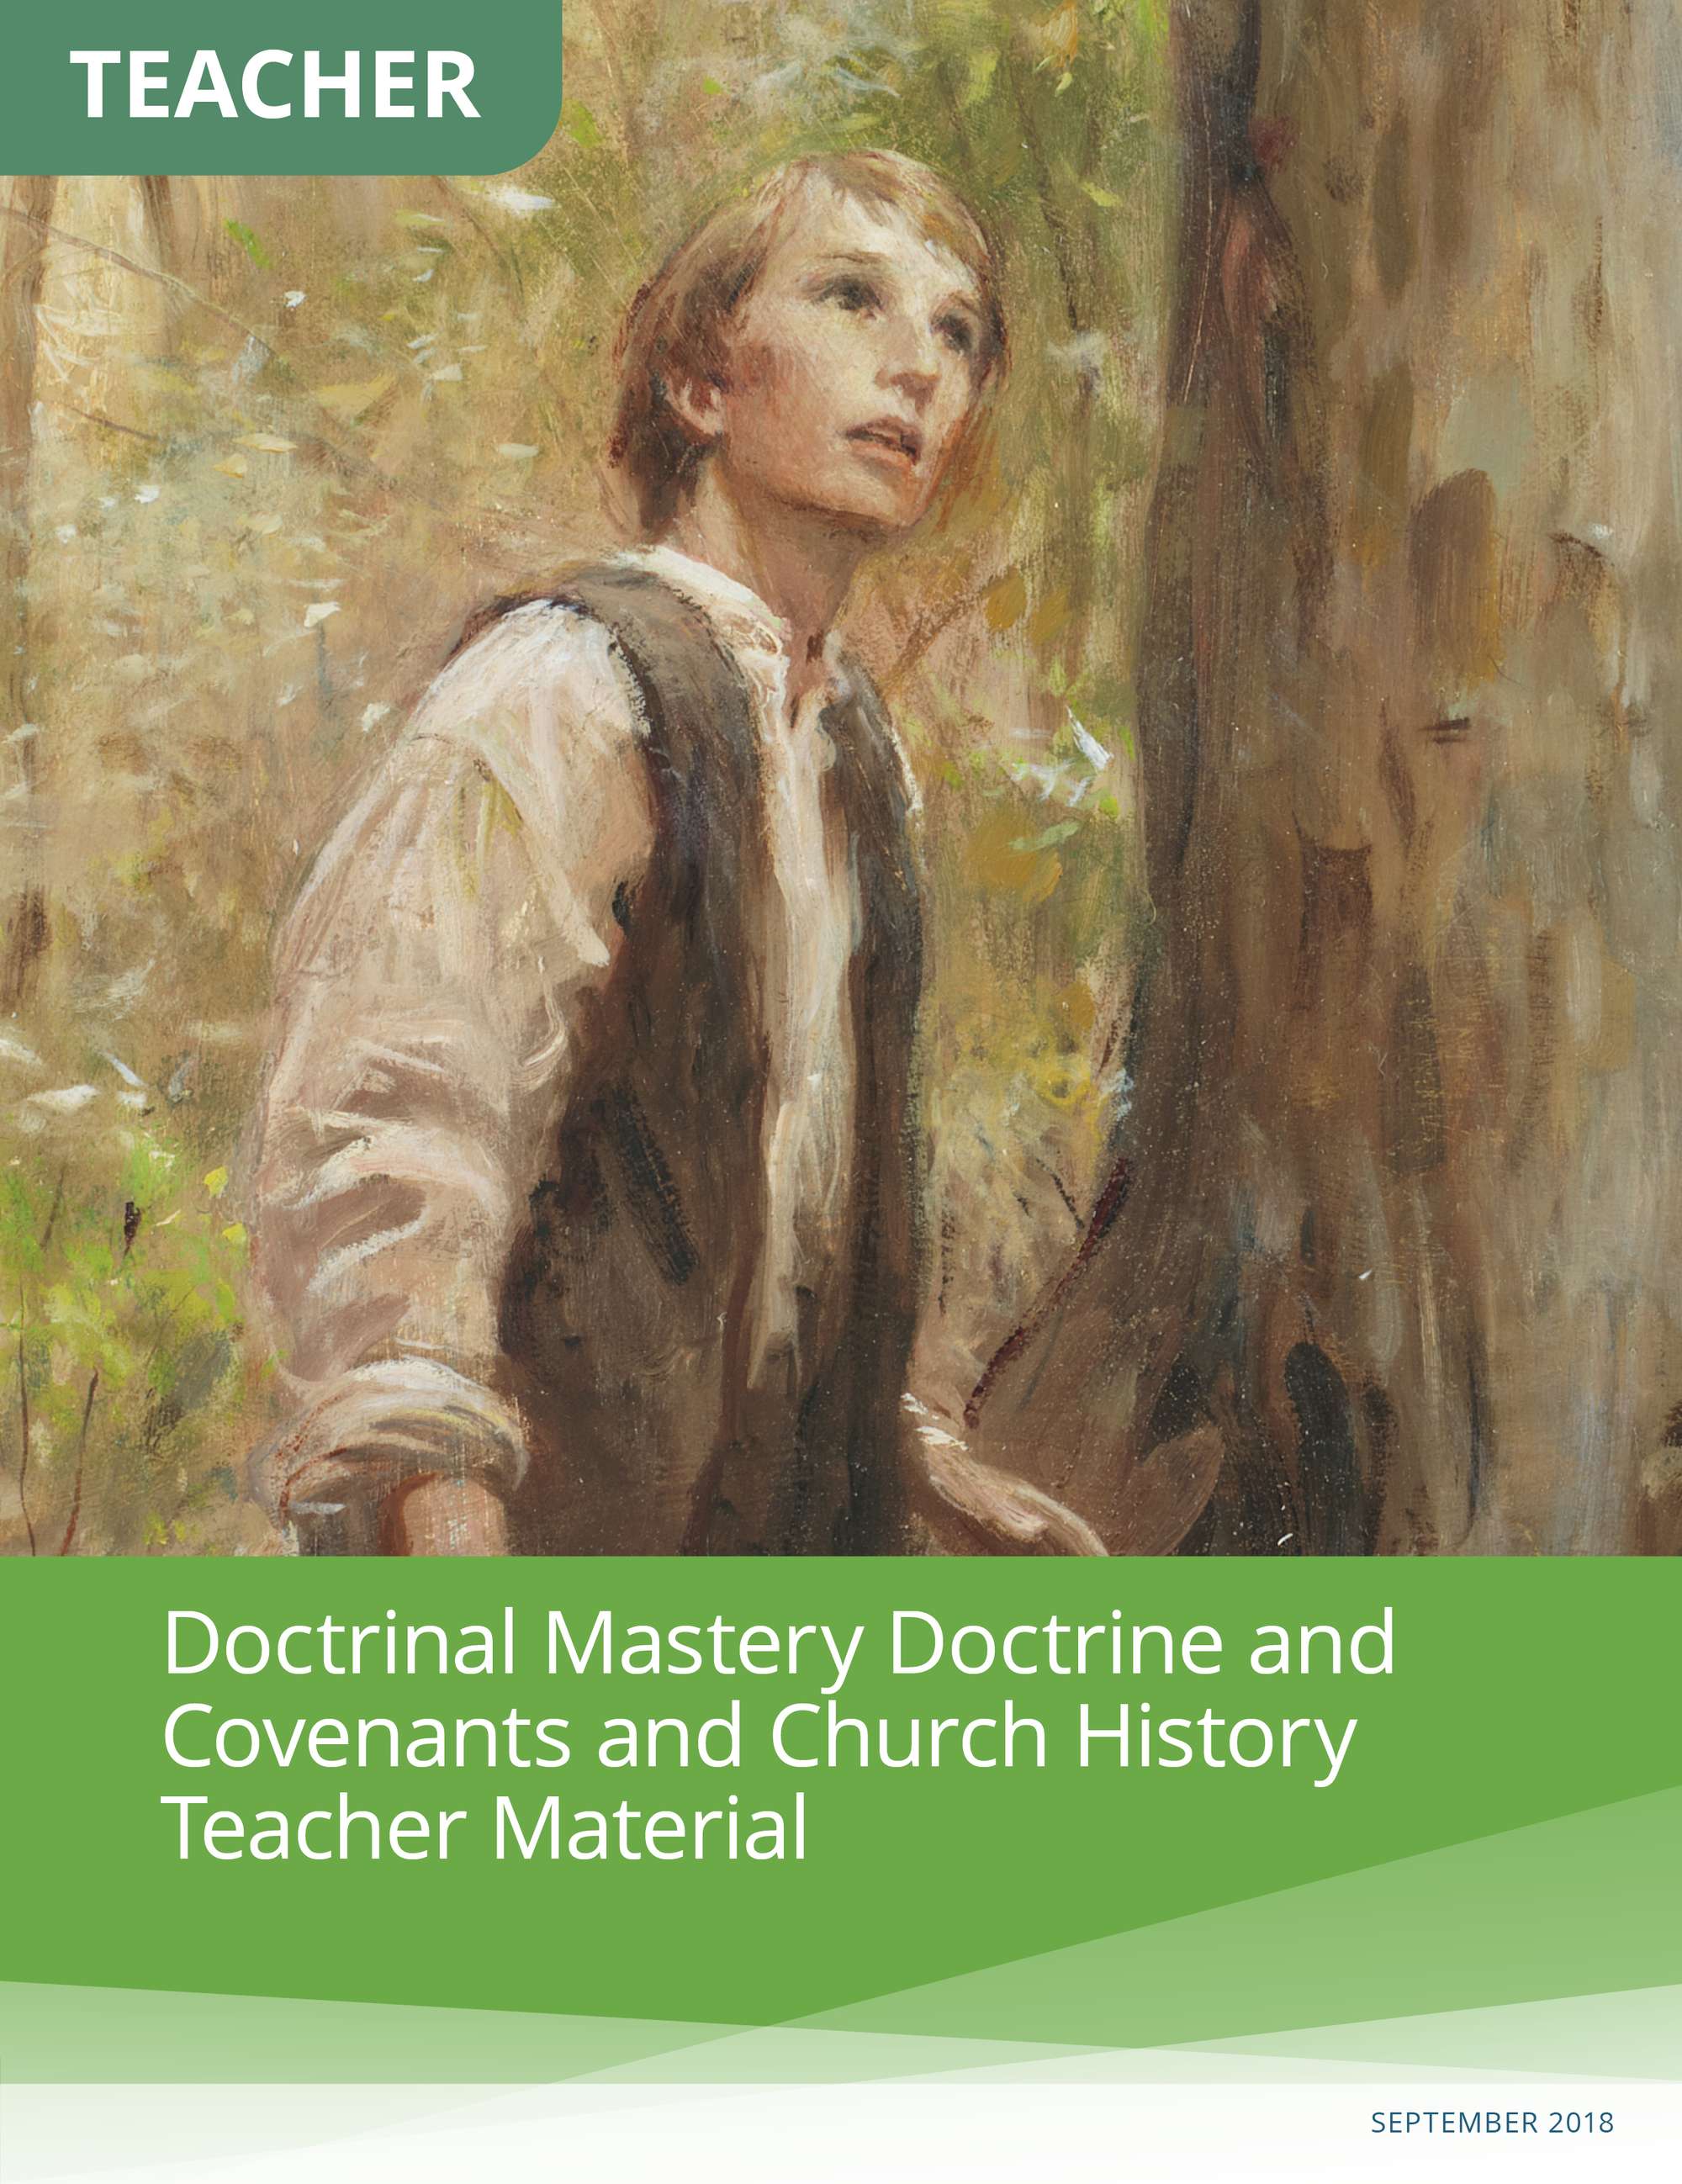 Doctrinal Mastery Doctrine and Covenants and Church History Teacher Material